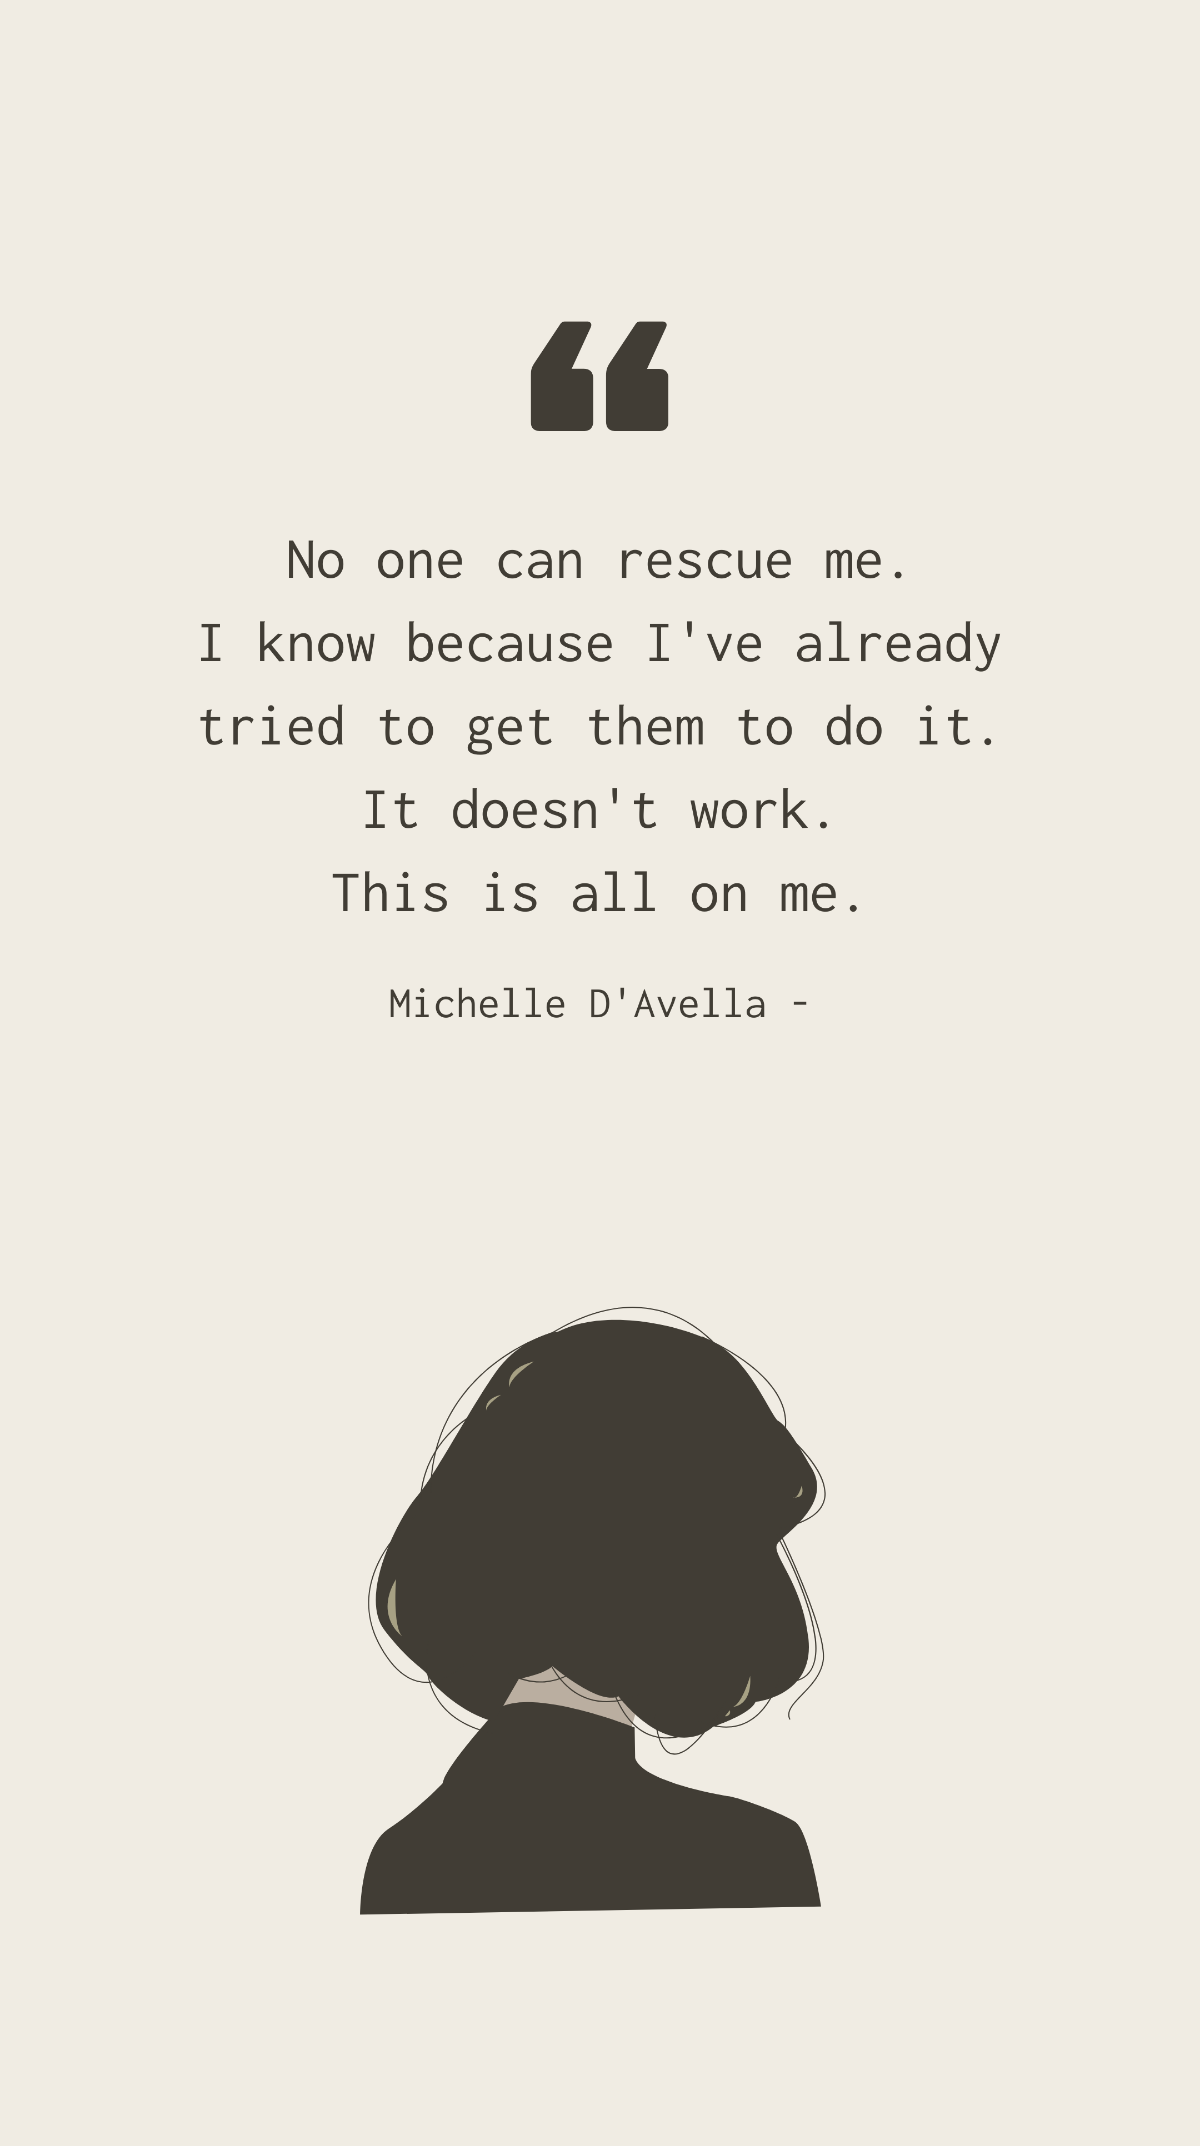 Free Michelle D'Avella - No one can rescue me. I know because I've already tried to get them to do it. It doesn't work. This is all on me. Template